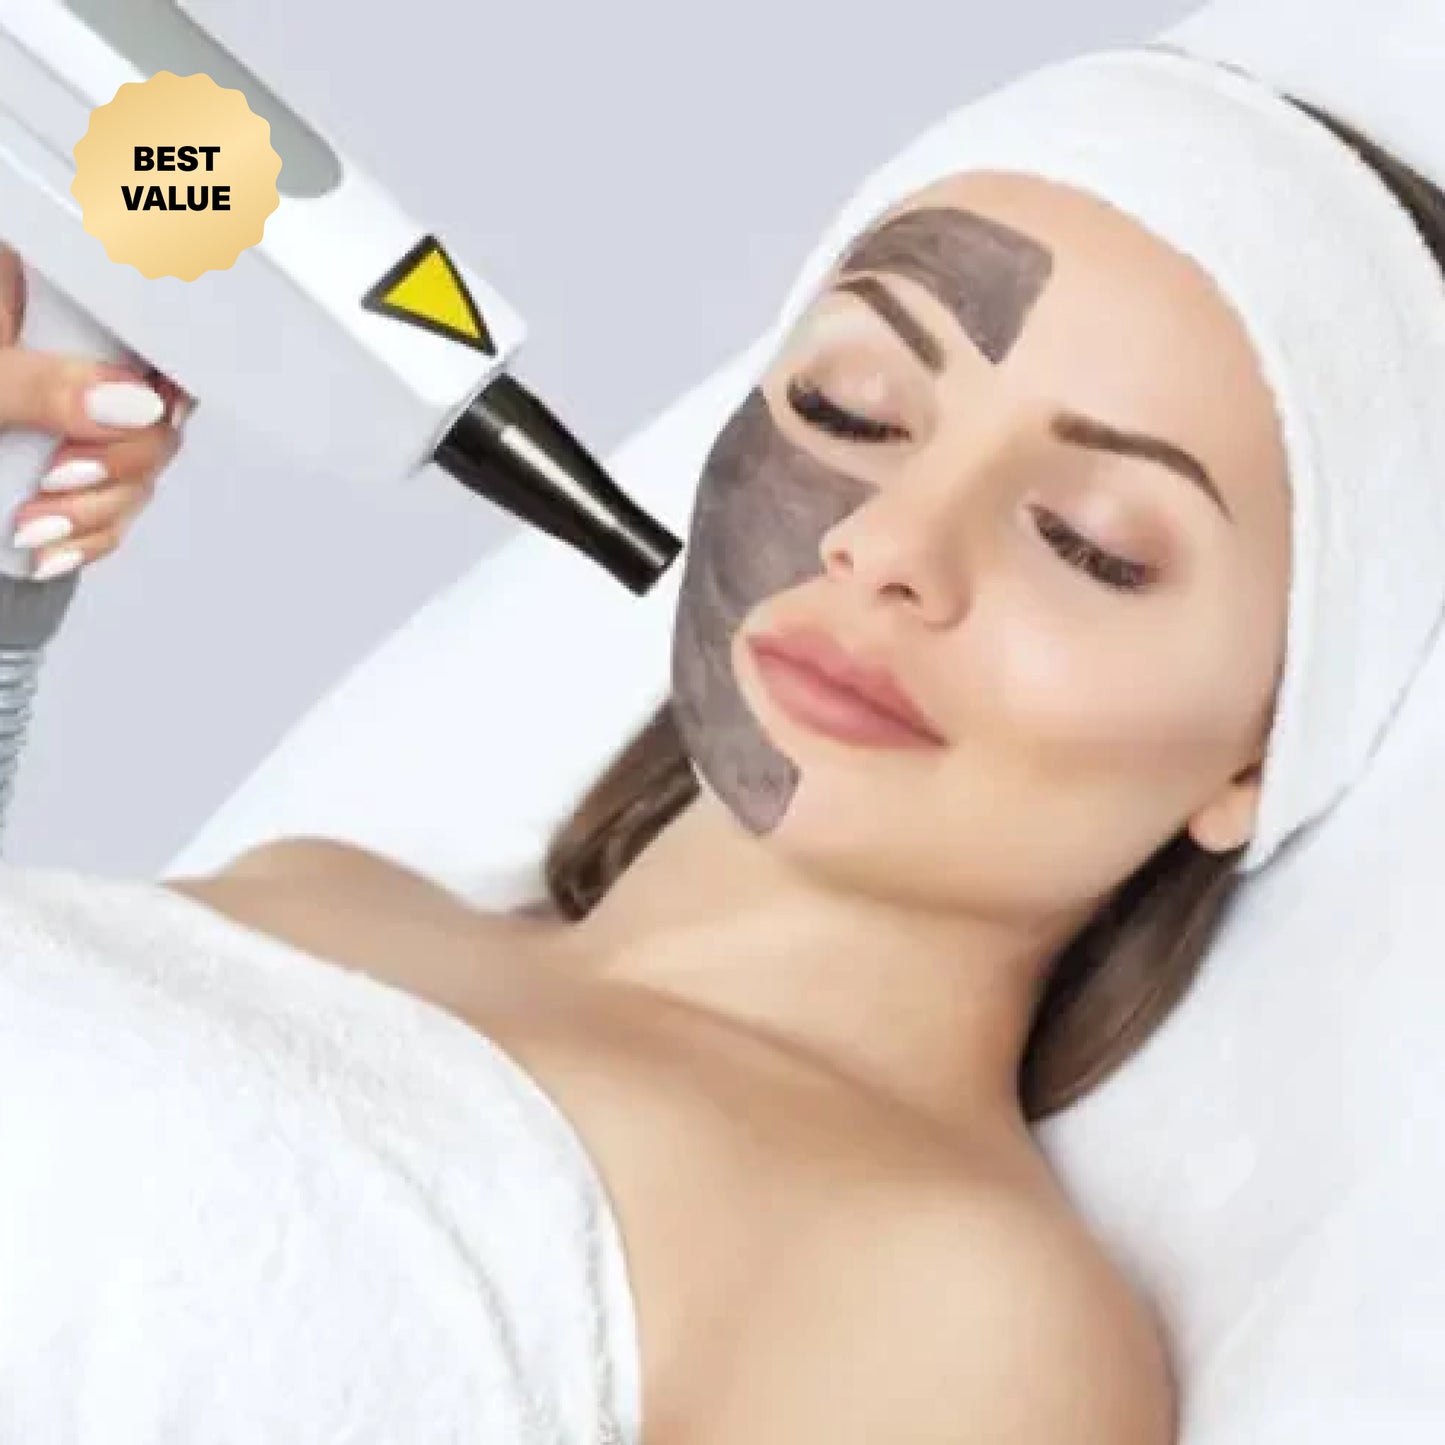 Best Value: 3 Cleaning Sessions + 3 Hollywood Peels